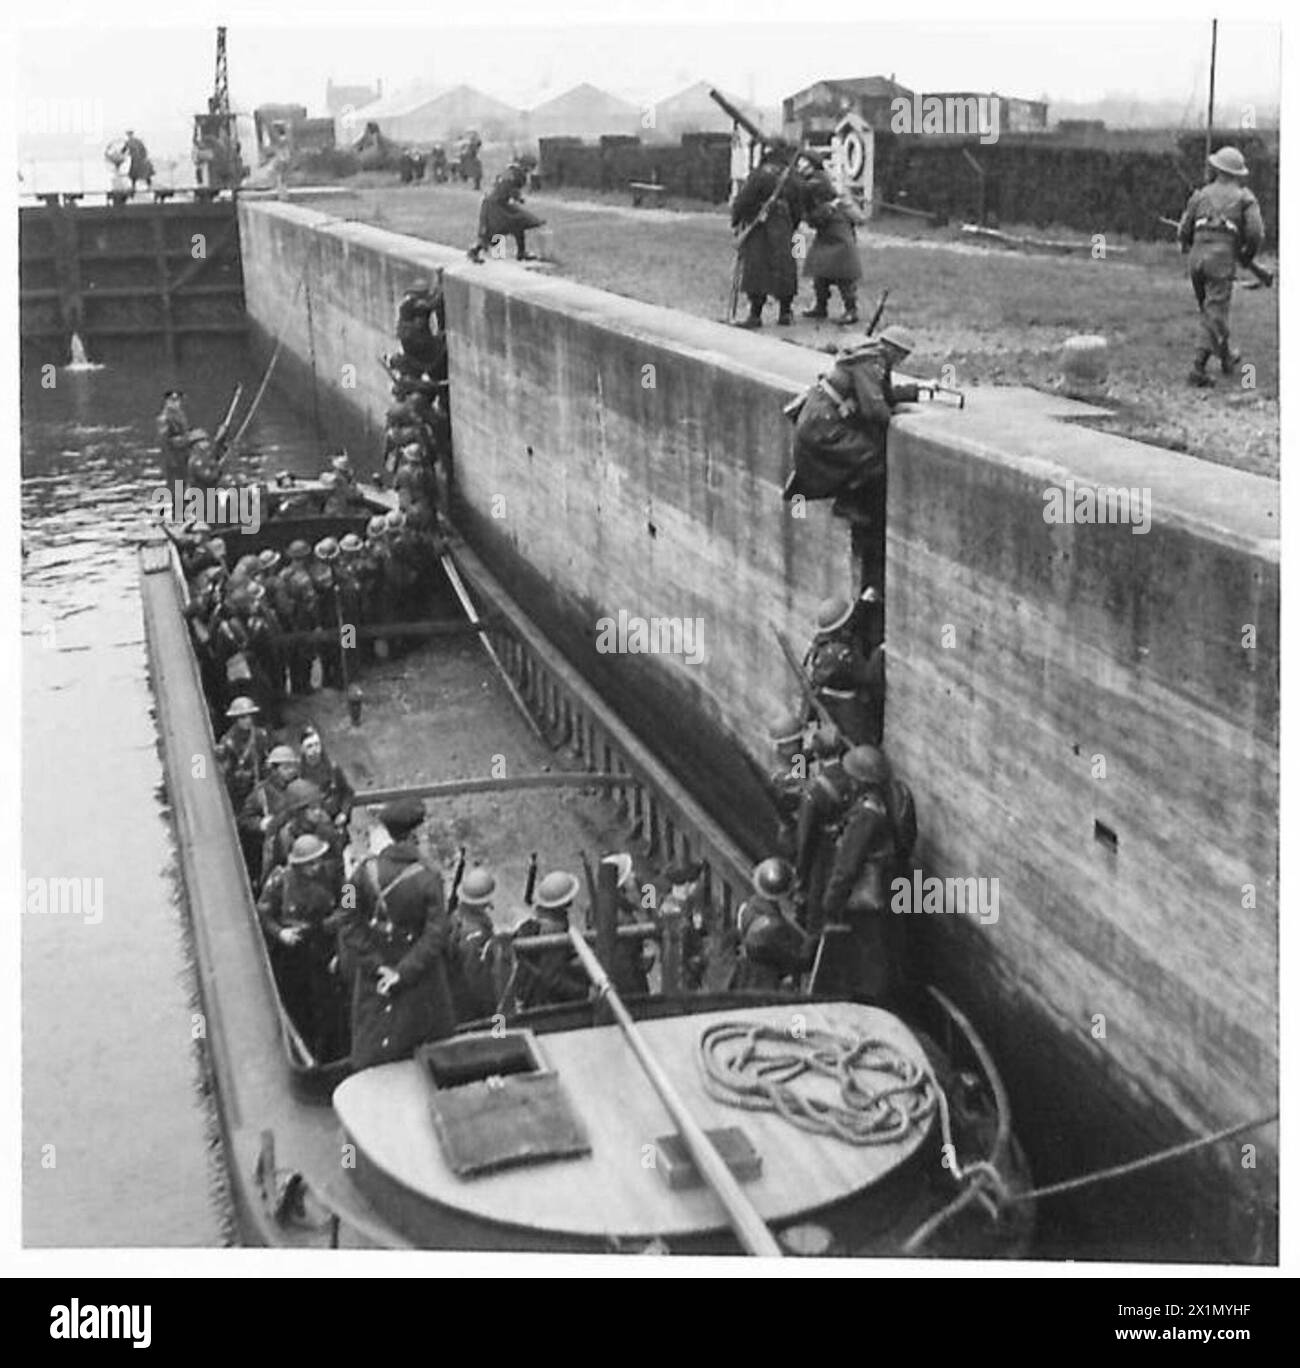 HOME GUARDS DEFEND INLAND WATERWAYS - Scaling the lock by means of iron run ladders, Home Guards leave the barge and reinforce the lock defences, British Army Stock Photo